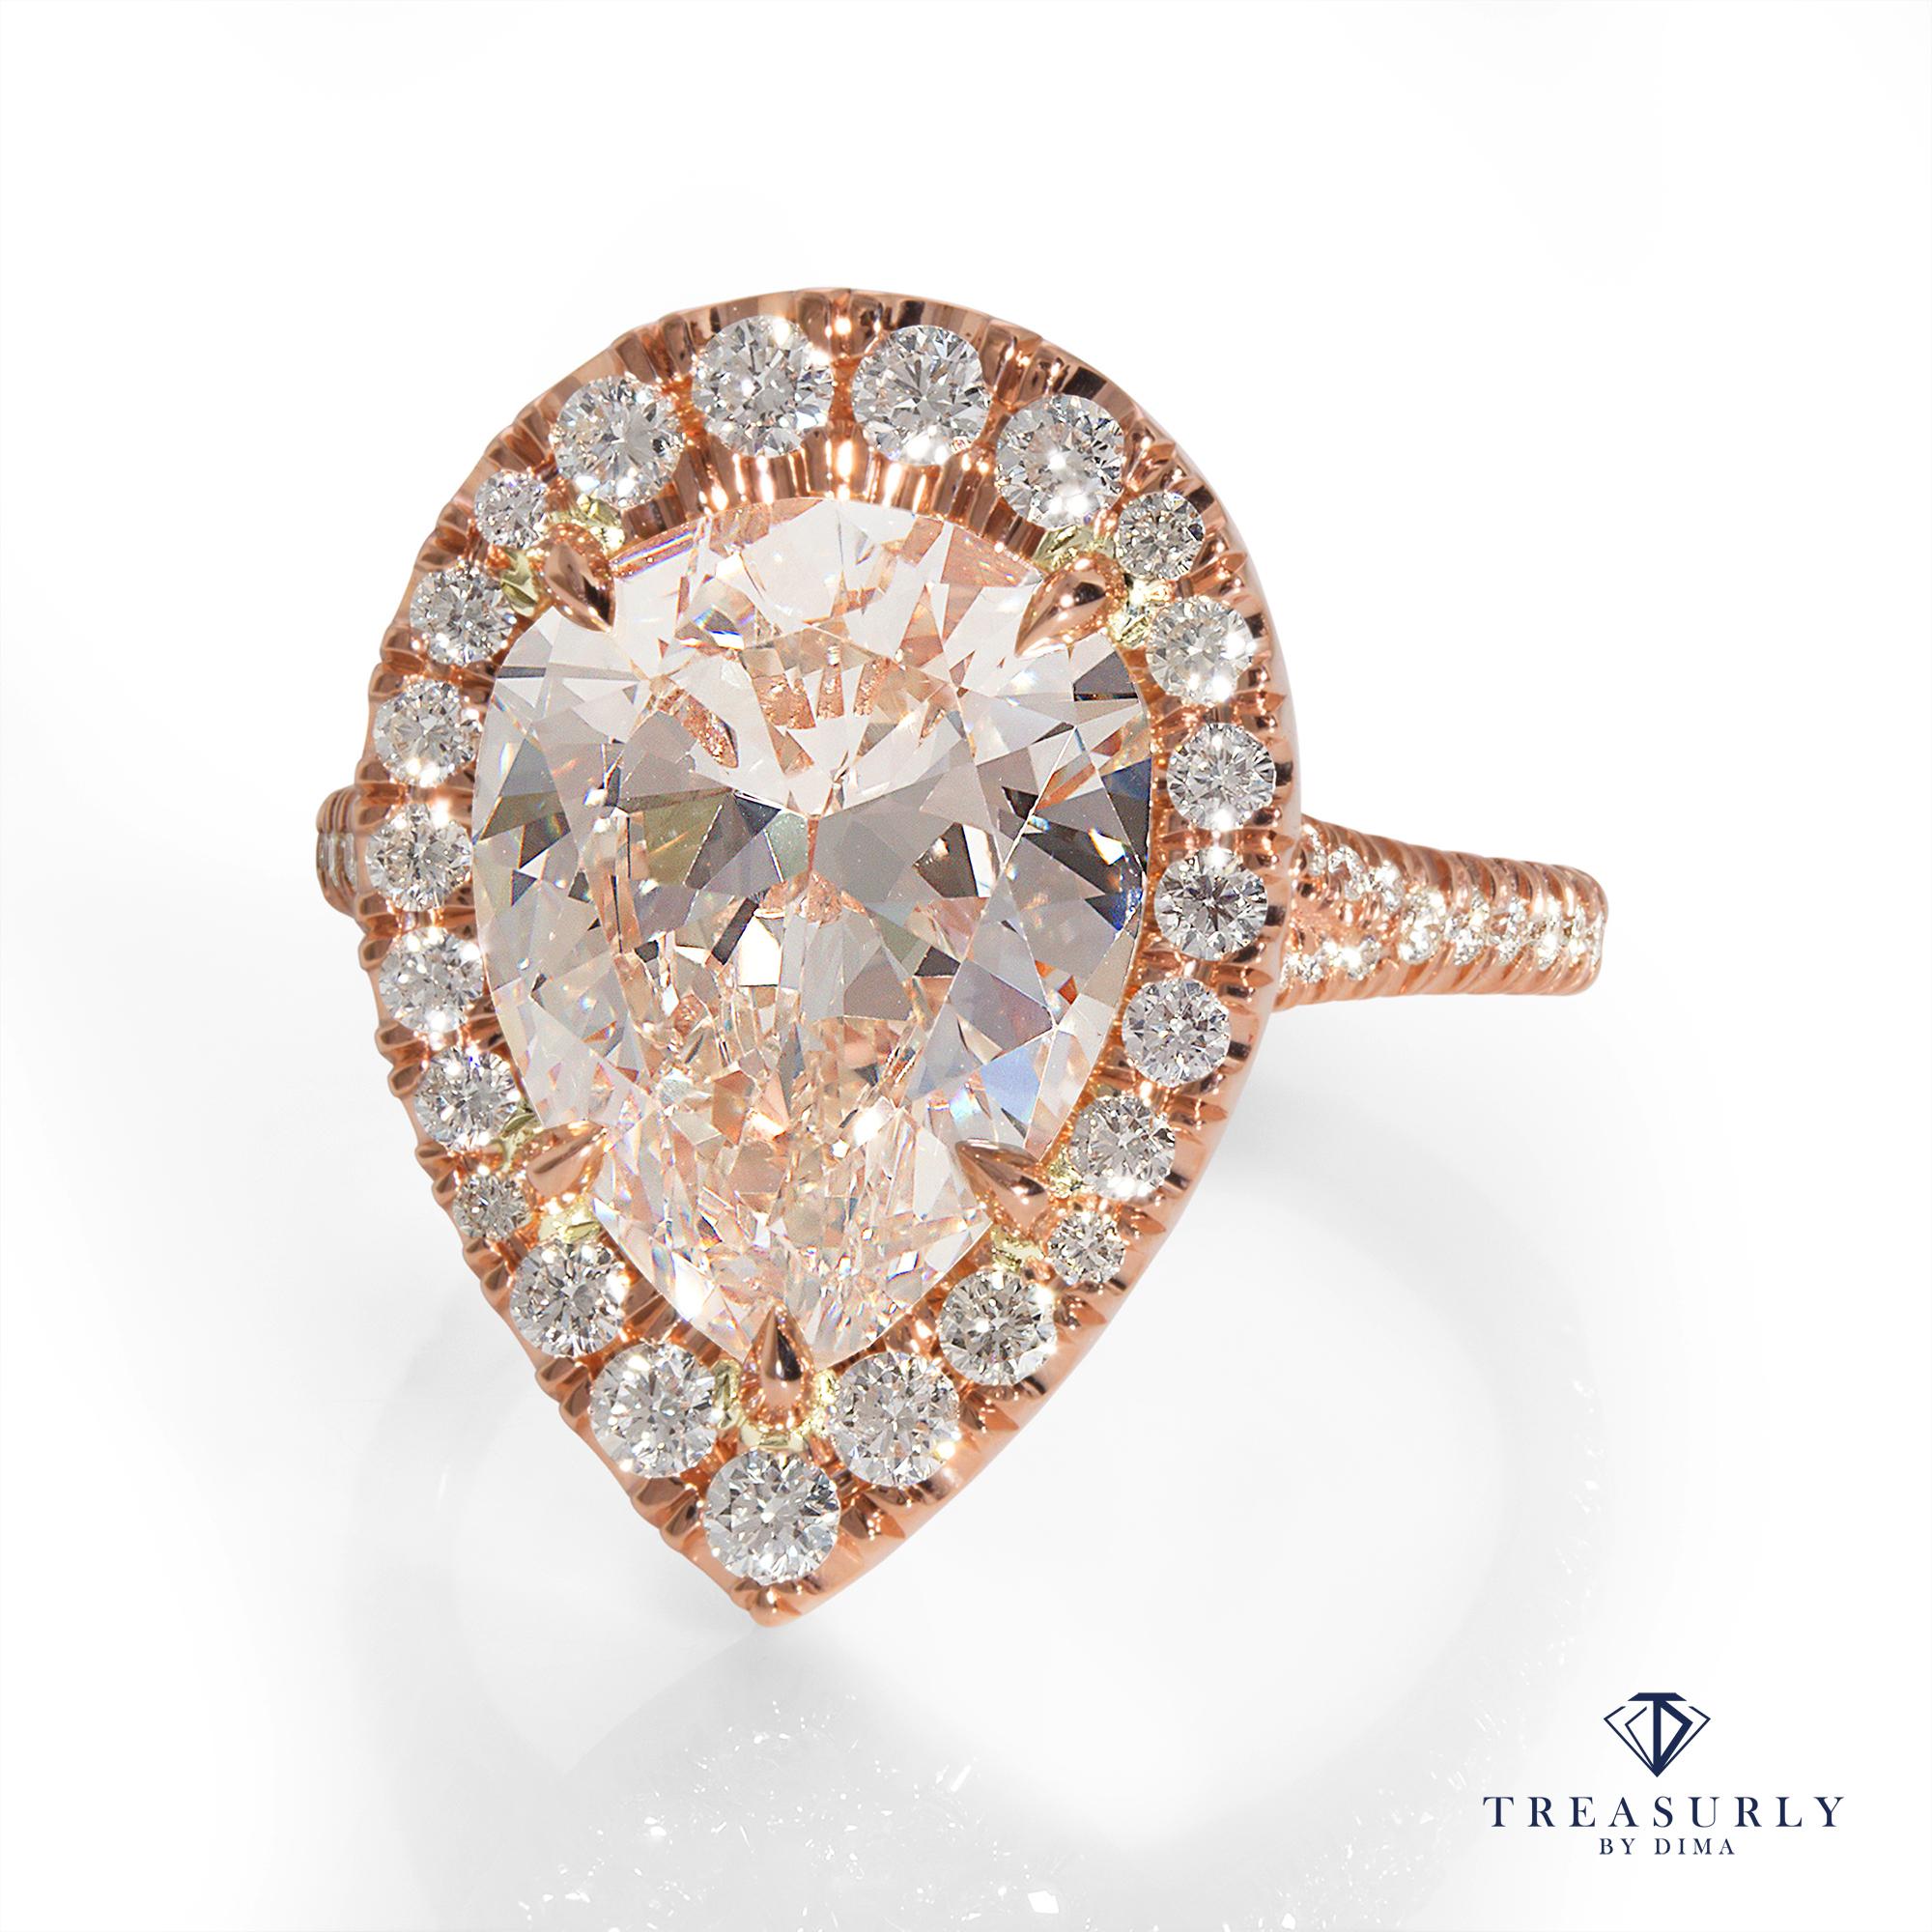 Elegant and Impressive, Timeless Micro Pave 14K Rose Gold Pave Halo PEAR shaped Diamond ring. 
The Center diamond is 5.09CT M, Faint Brown color, VS1 clarity GIA CERTIFIED. GREAT CUT and AMAZING BRILLIANCE!
The Diamond is Warm White with a slight